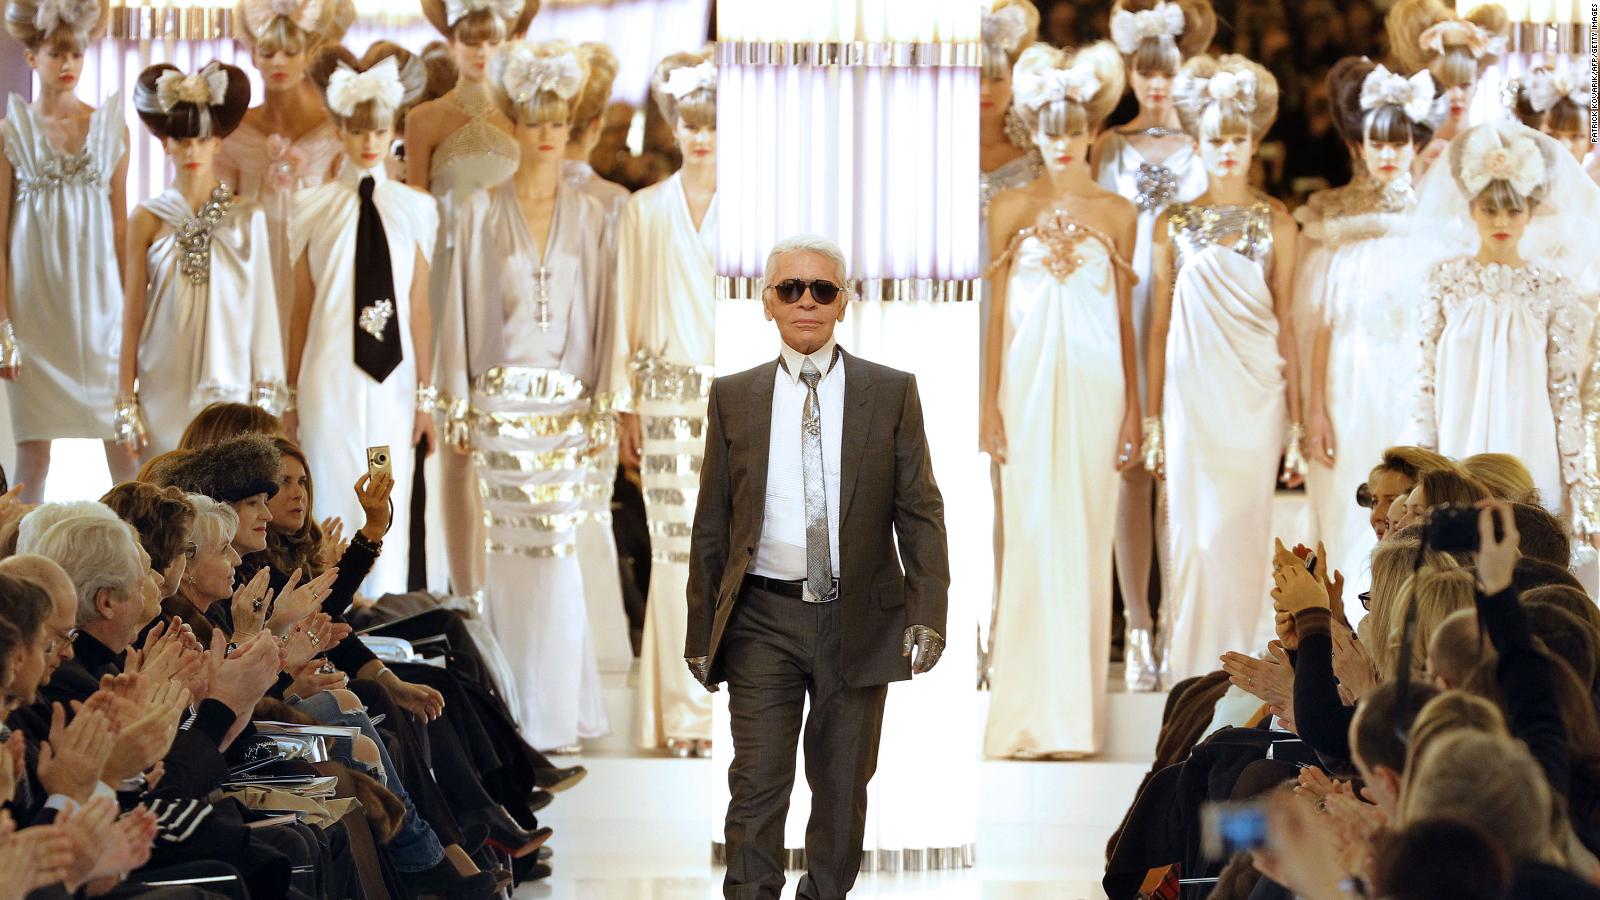 KARL LAGERFELD WILL LIVE ON IN OUR AS THE ULTIMATE FASHION LEGEND | UNTITLED MAGAZINE